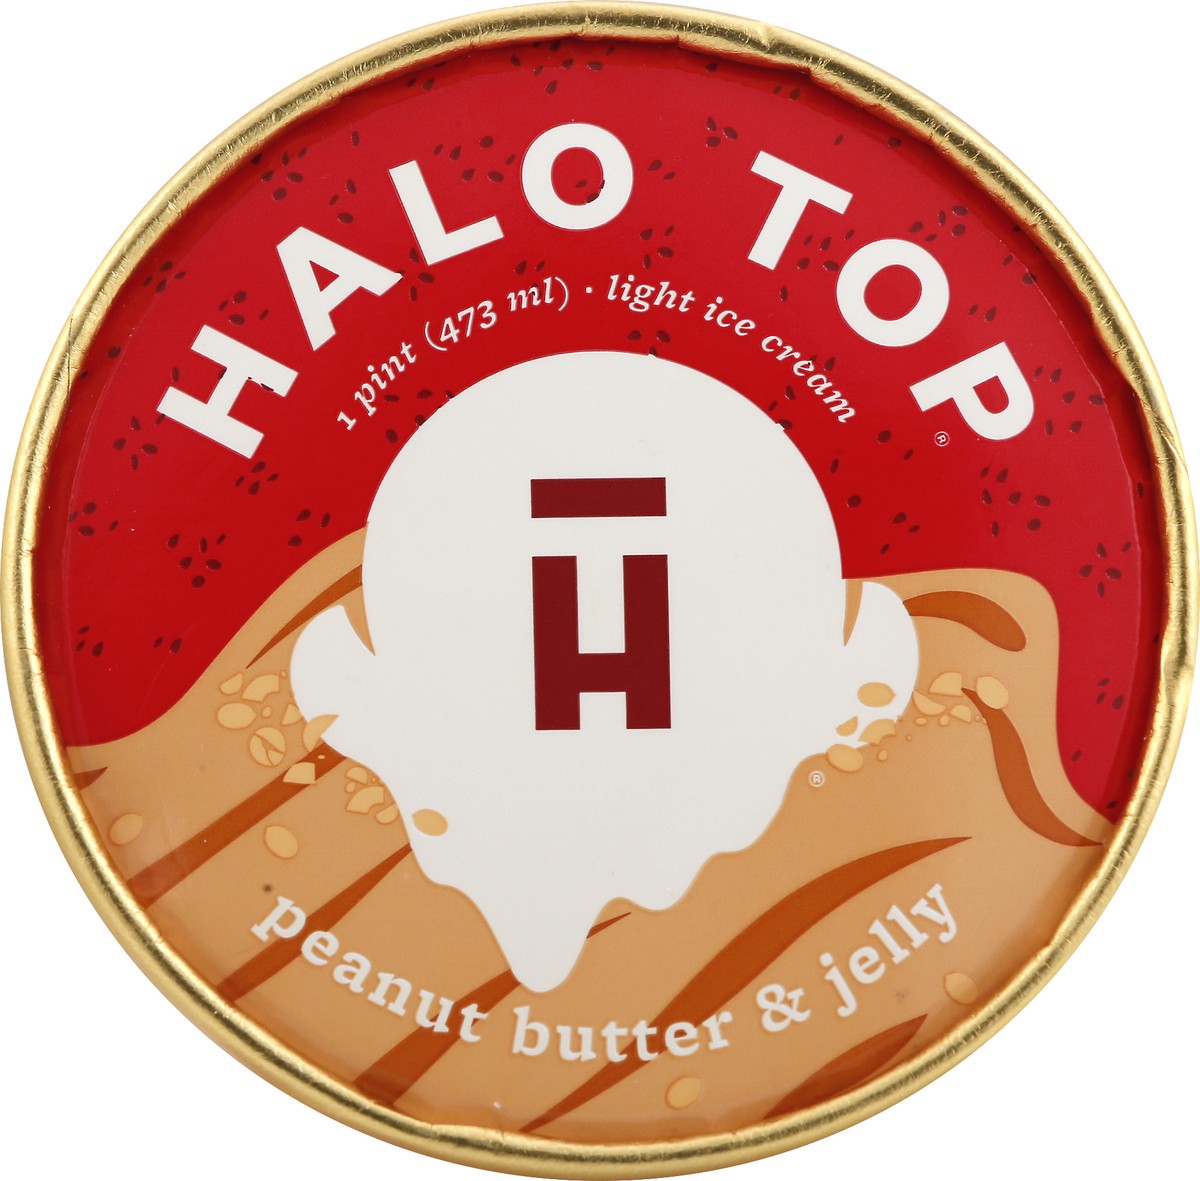 slide 9 of 9, Halo Top Peanut Butter And Jelly Ice Cream Pint - Pint, 1 pint